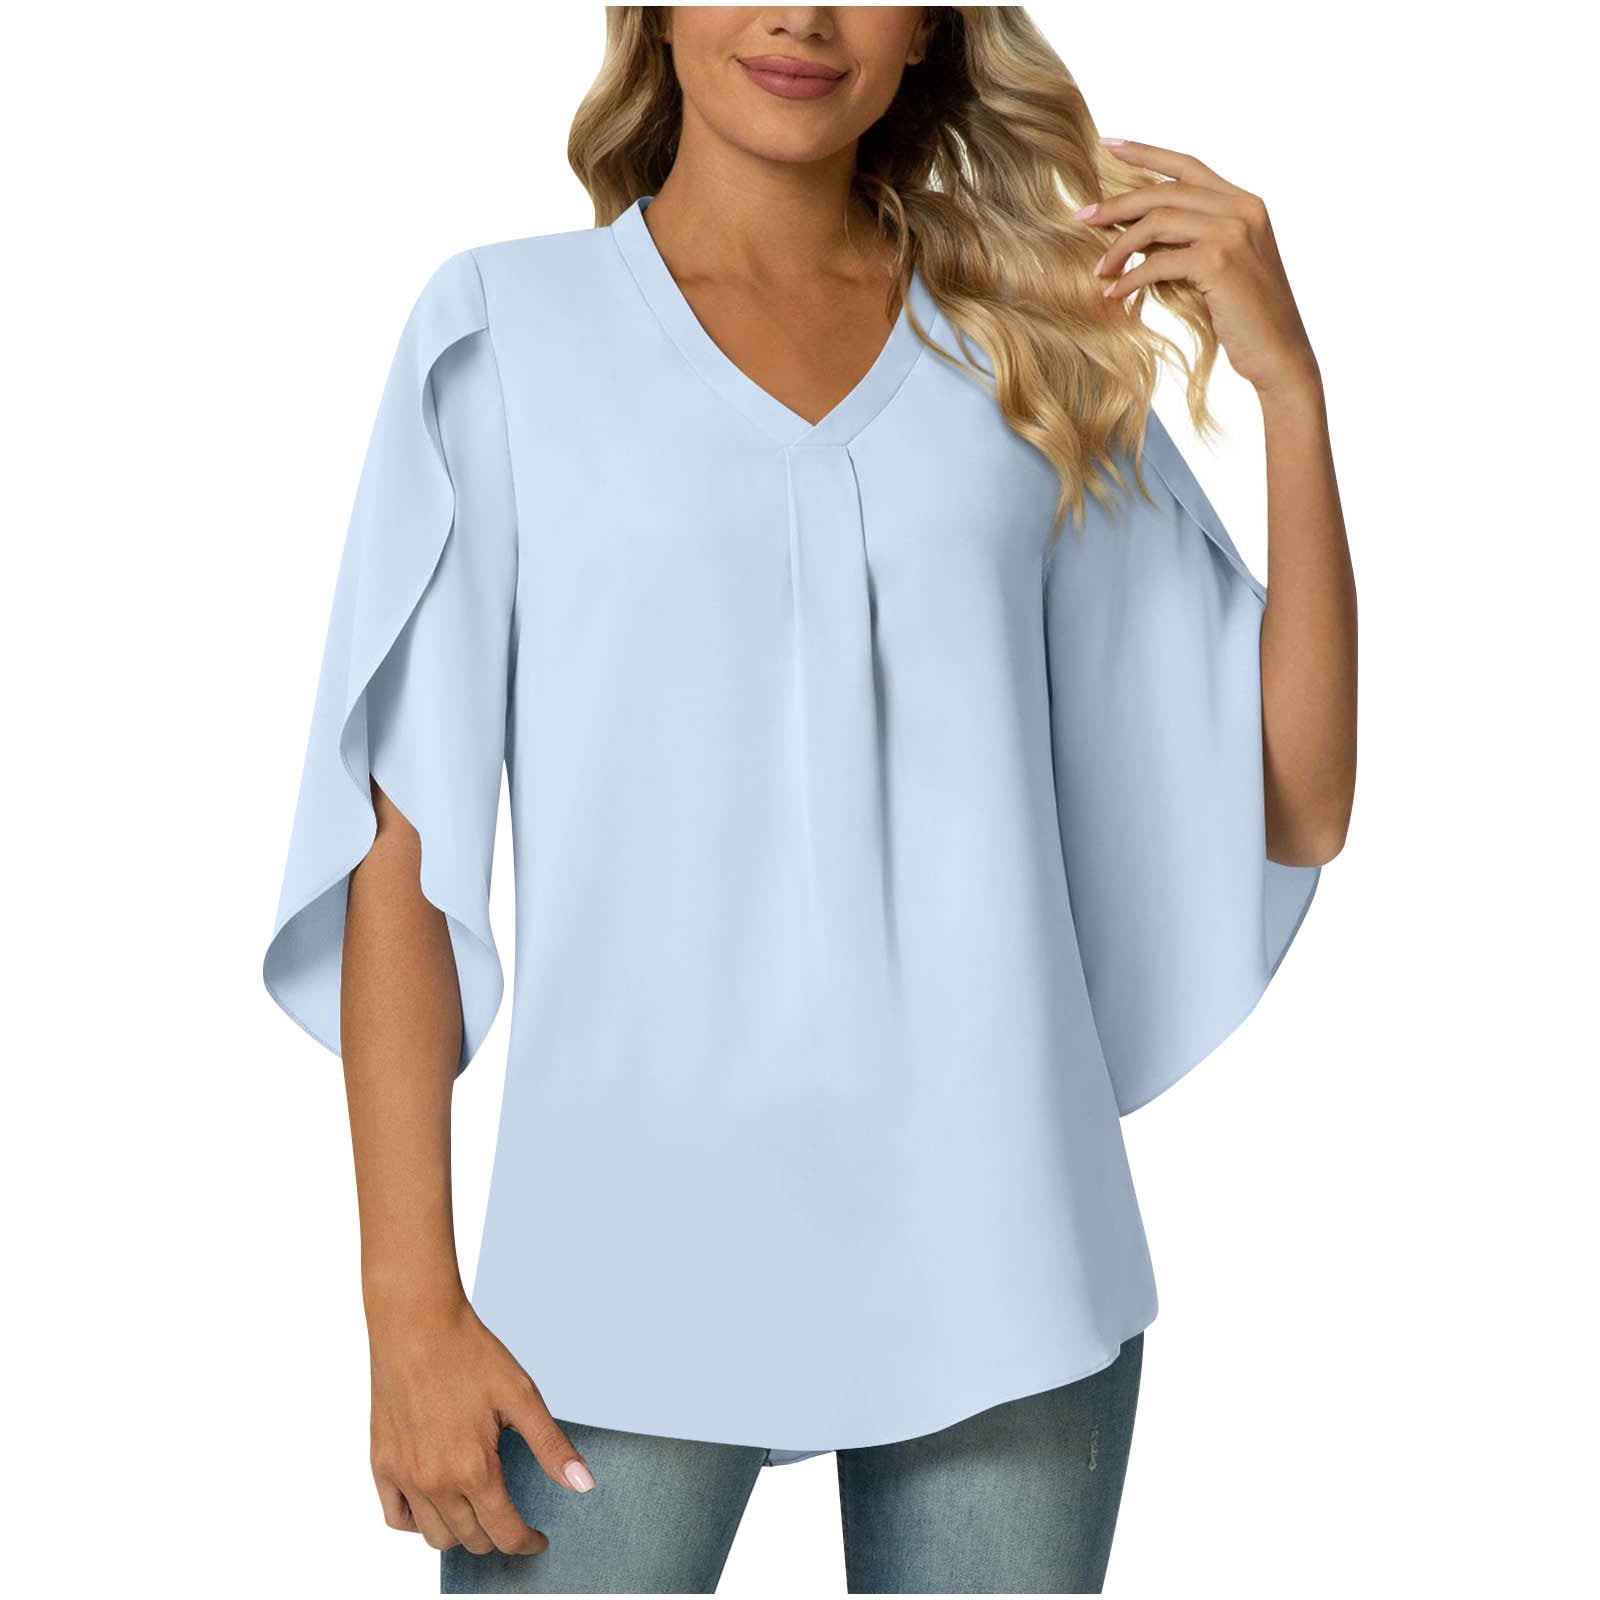 RQYYD Clearance Women's Elegant Notch V Neck Lace Trim Cap Sleeve Blouse  Shirt Sleeveless Business Work Office Solid Top(Sky Blue,L) 